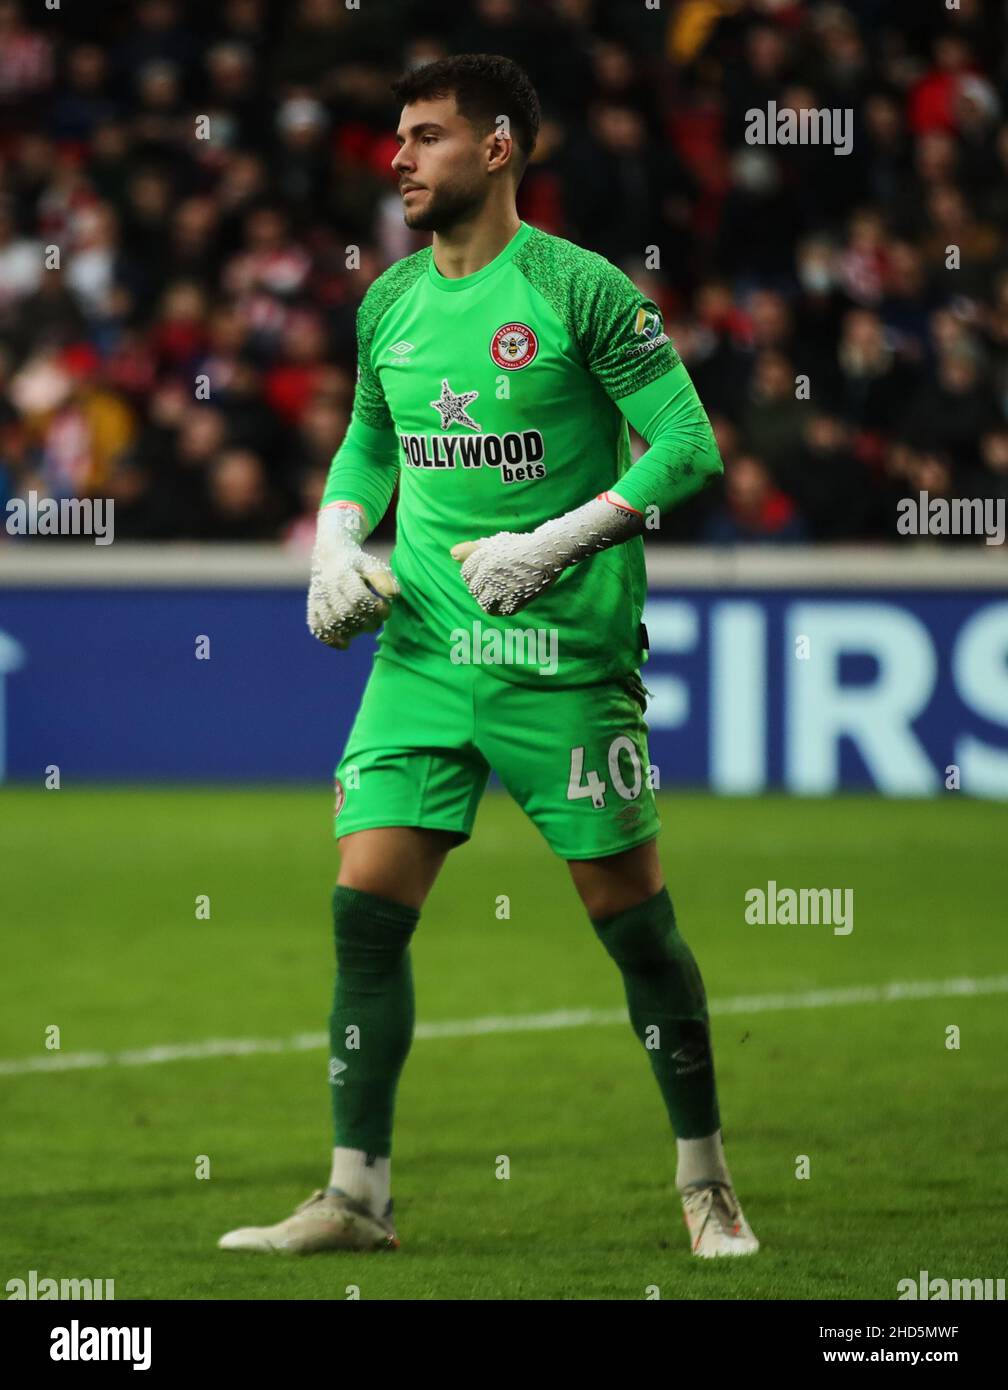 BRENTFORD, ENGLAND - JANUARY 02: Brentford goalkeeper Álvaro Fernández during the Premier League match between Brentford and Aston Villa at Brentford Community Stadium on January 2, 2022 in Brentford, England. (Photo by Ben Peters/MB Media) Stock Photo